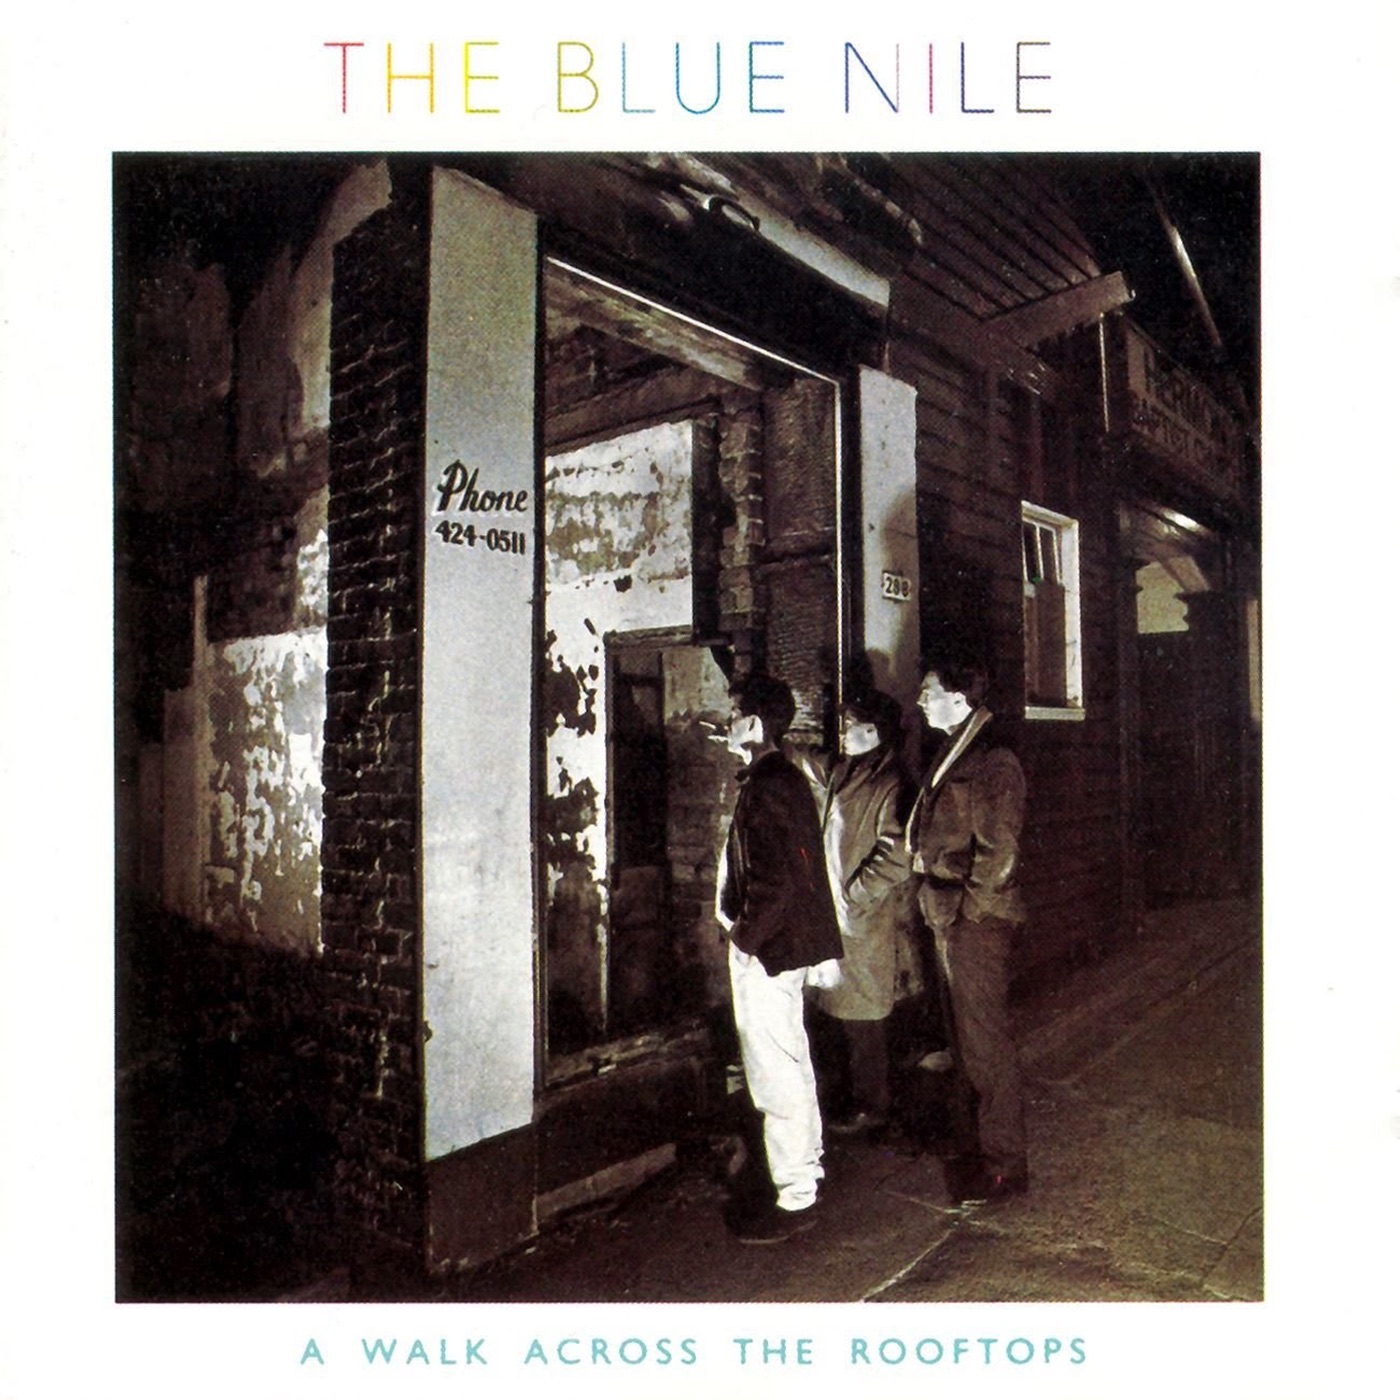 A Walk Across the Rooftops by The Blue Nile